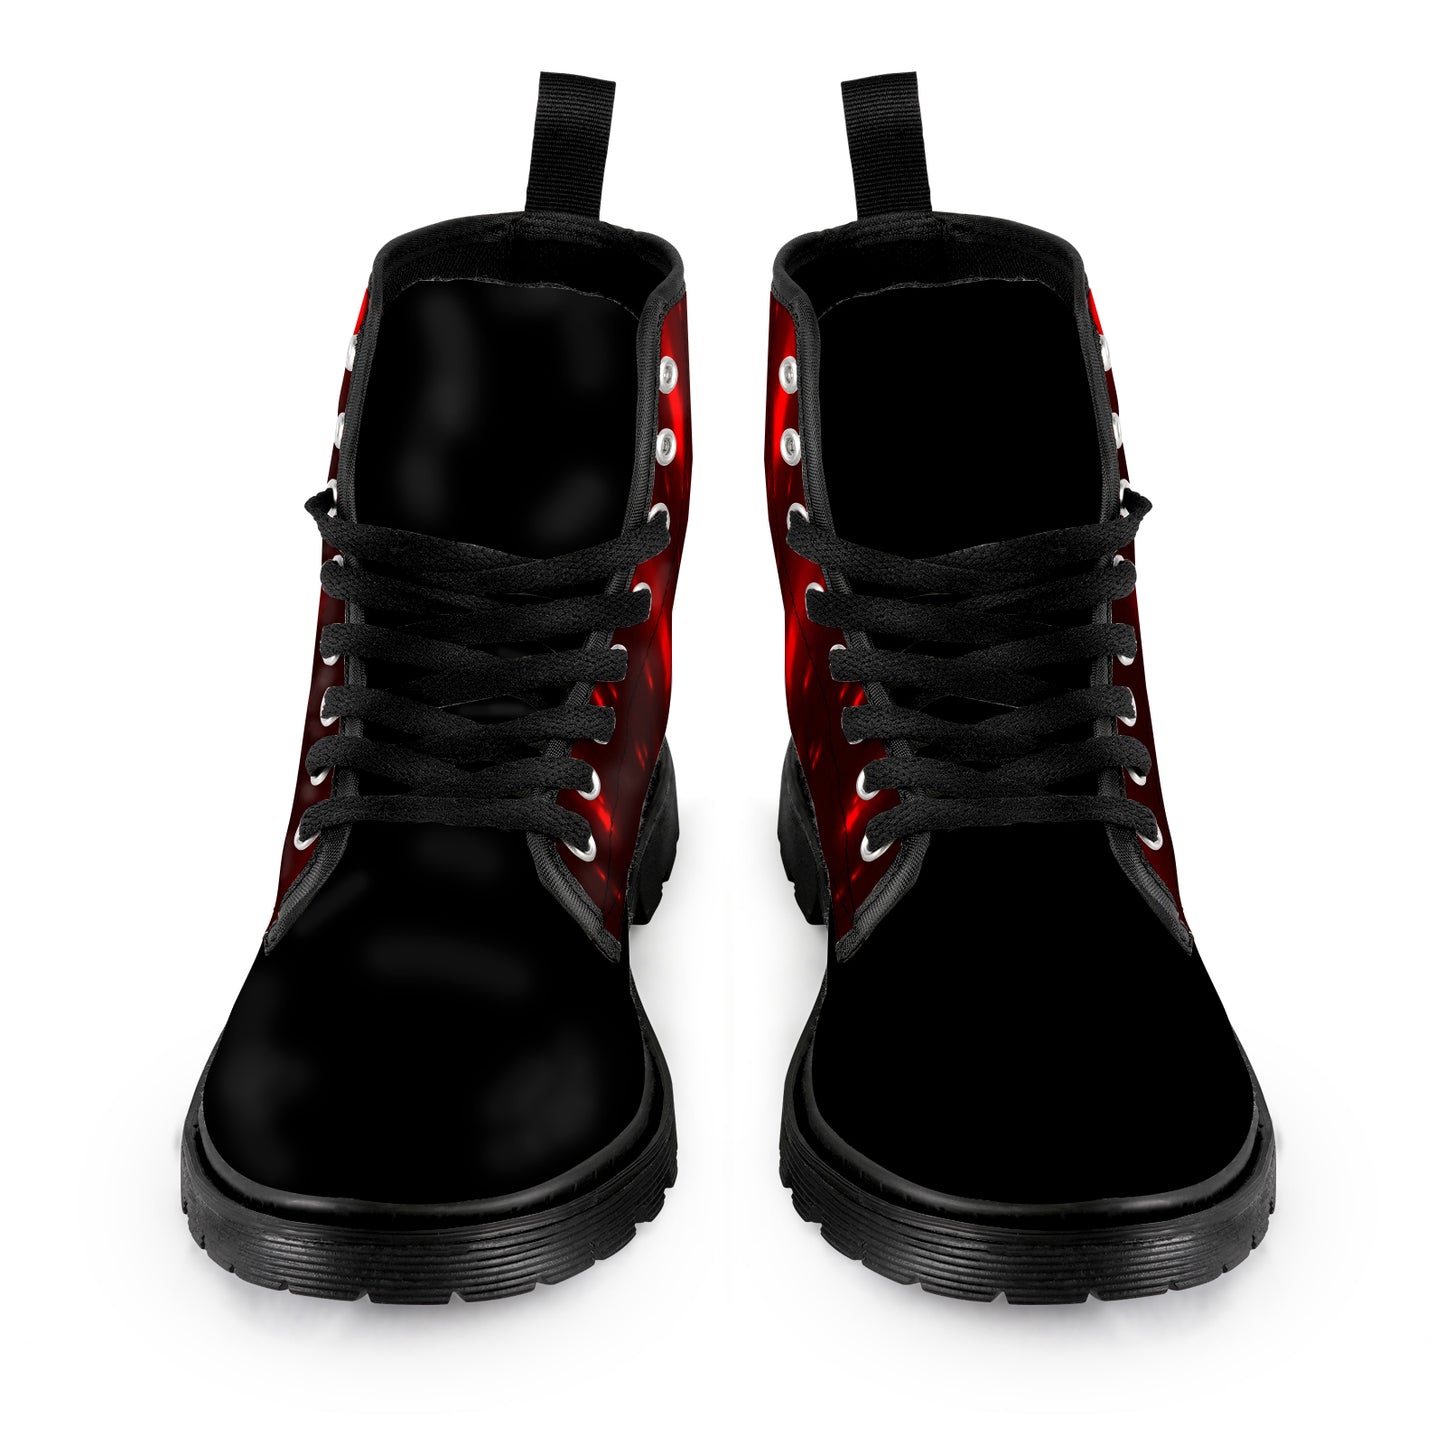 Men's Lace Up Canvas Boots - Red Astroid